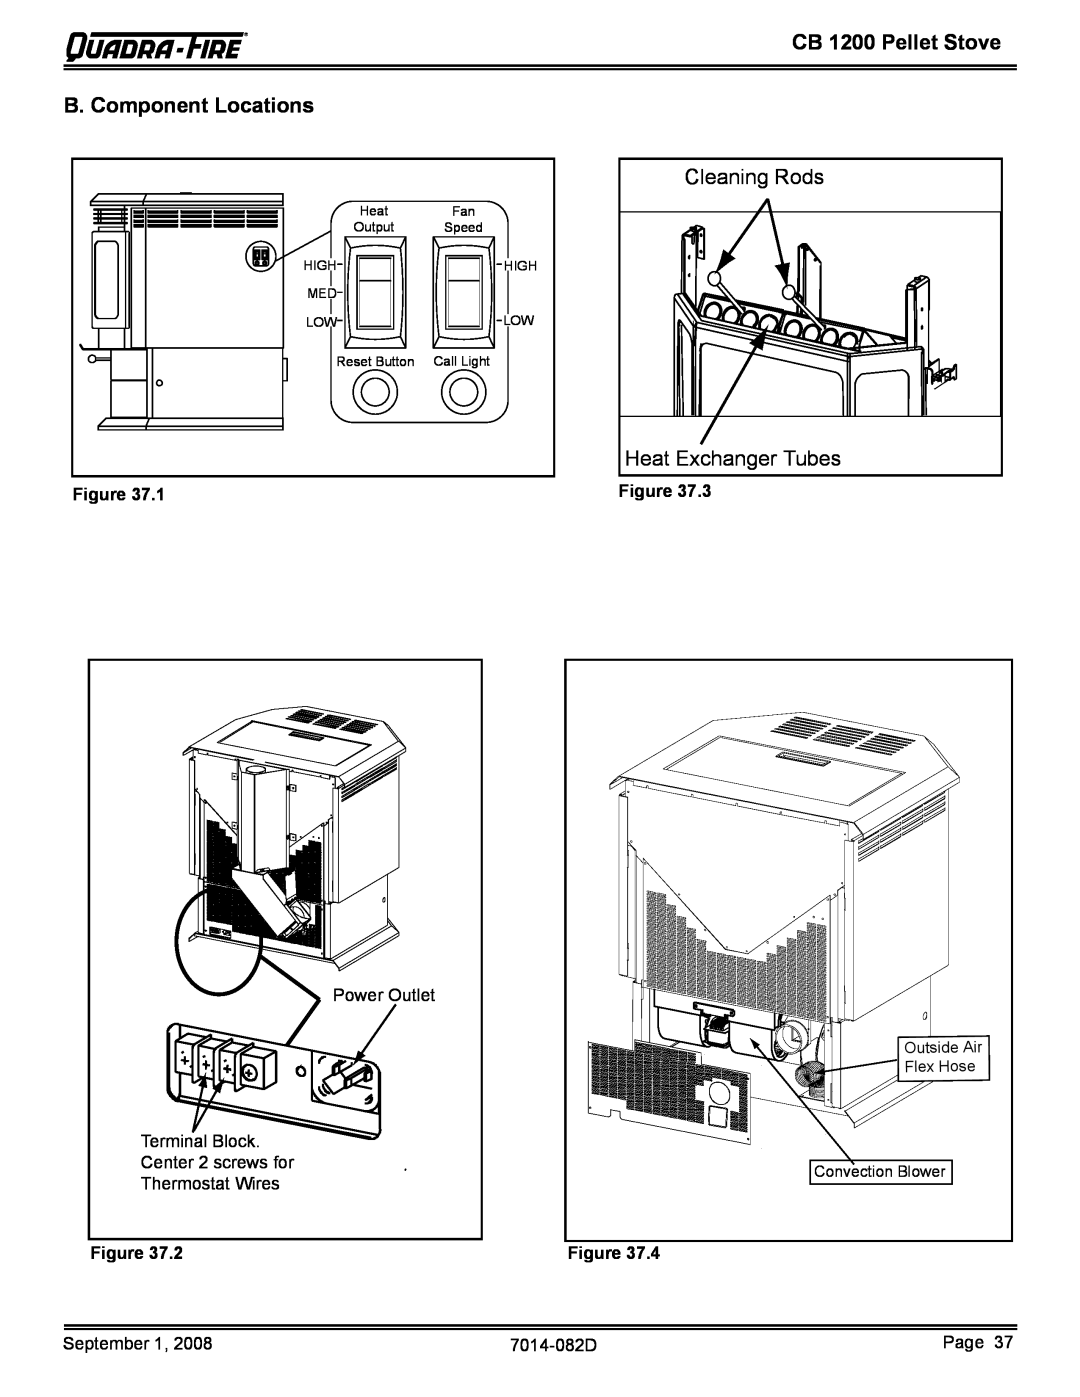 Quadra-Fire CB1200-B B. Component Locations, Cleaning Rods Heat Exchanger Tubes, CB 1200 Pellet Stove, Output, Speed 